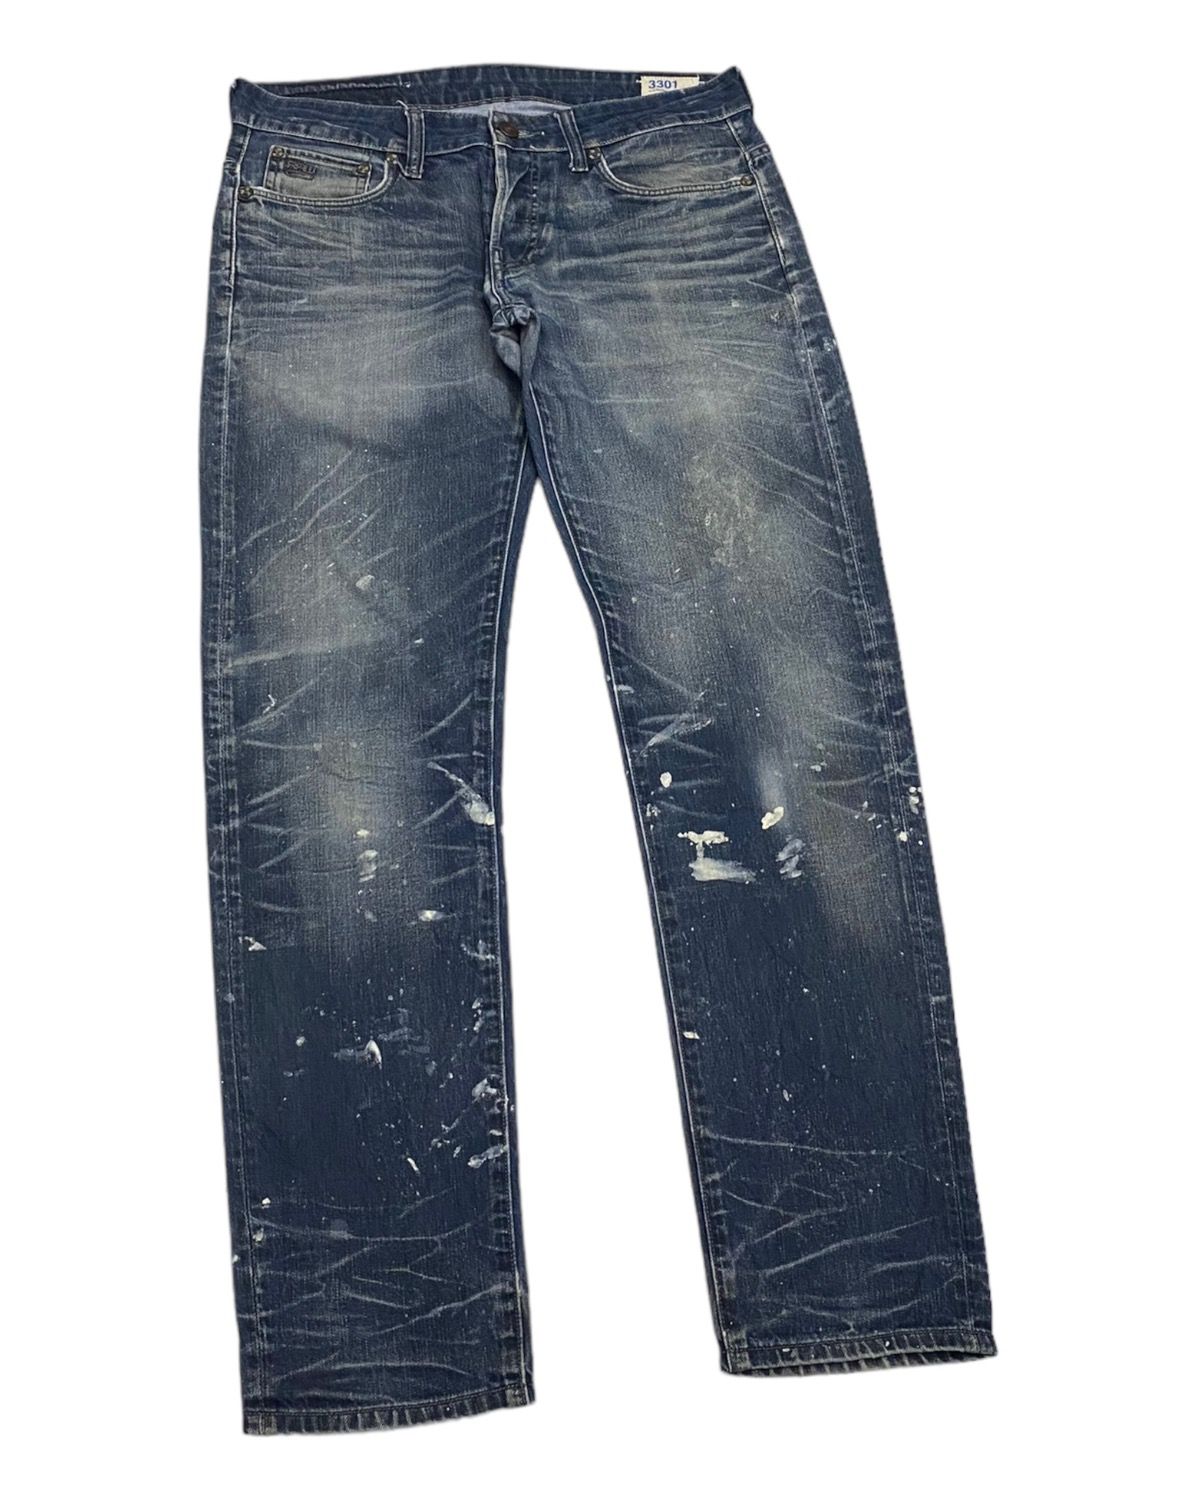 Archival Clothing - G-STAR RAW DISTRESSED PAINTED 3301 UNDERCOVER STYLE JEANS - 7